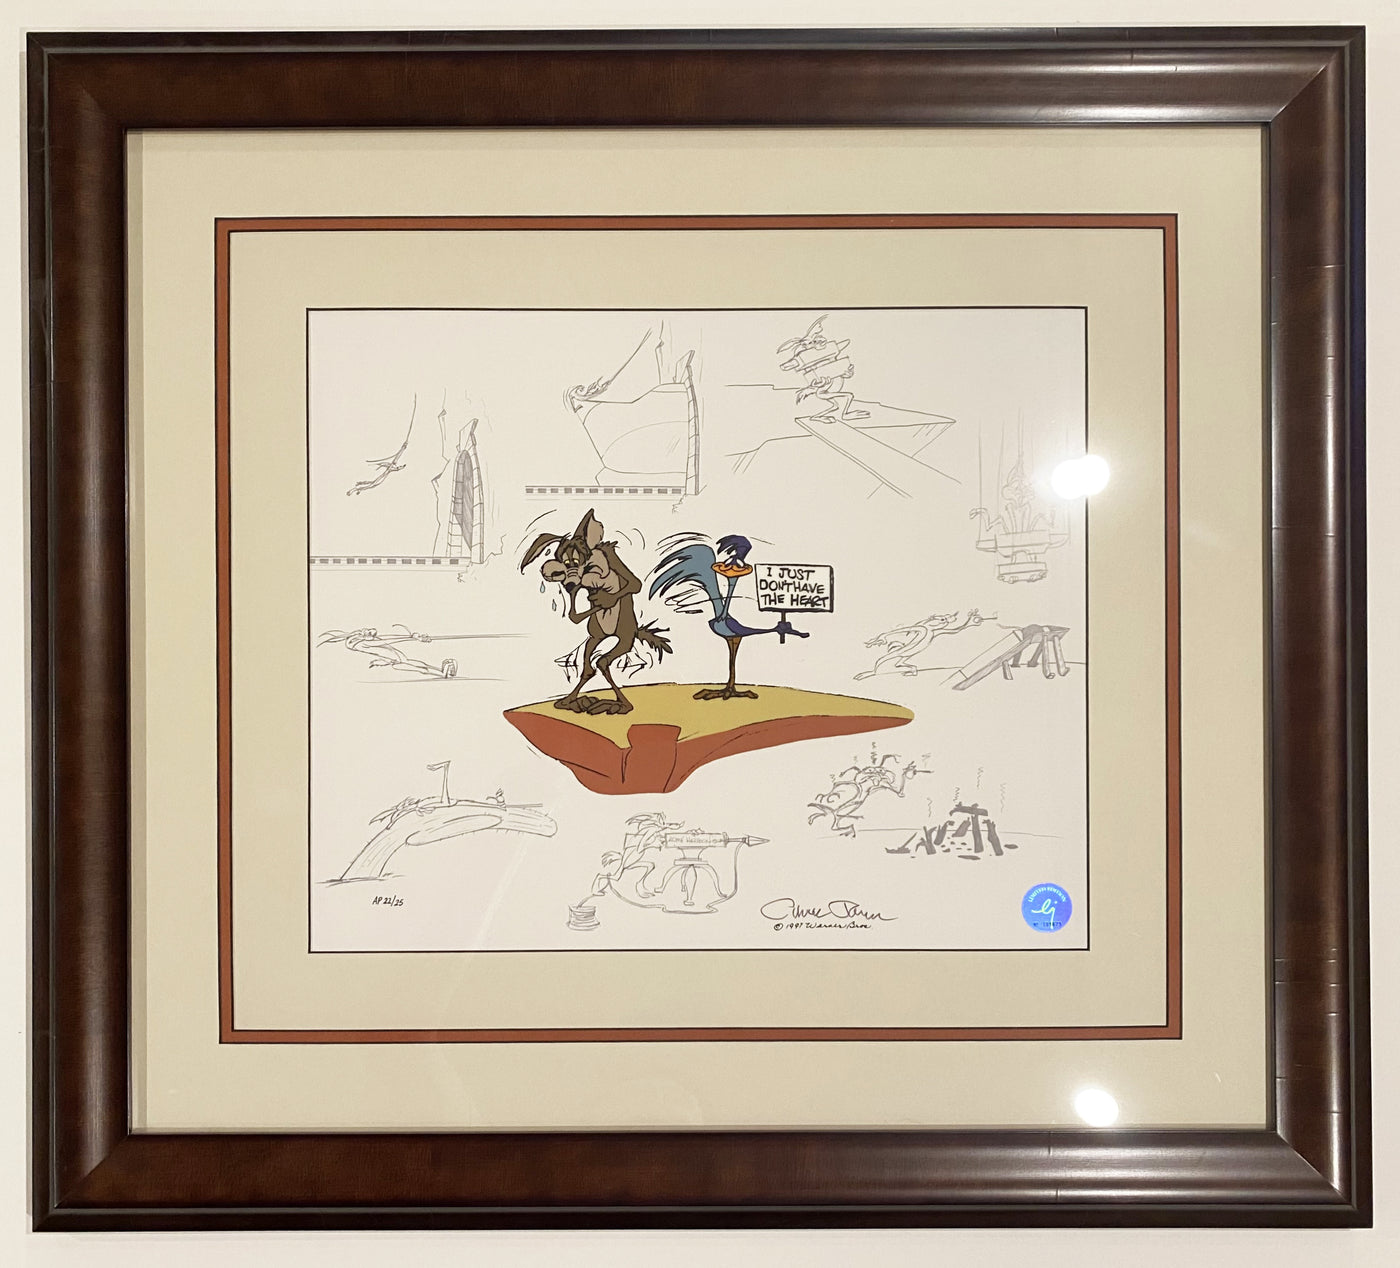 Warner Brothers Limited Edition Cel "Zoom and Bored" Signed By Chuck Jones Featuring Wile E. Coyote and Road Runner